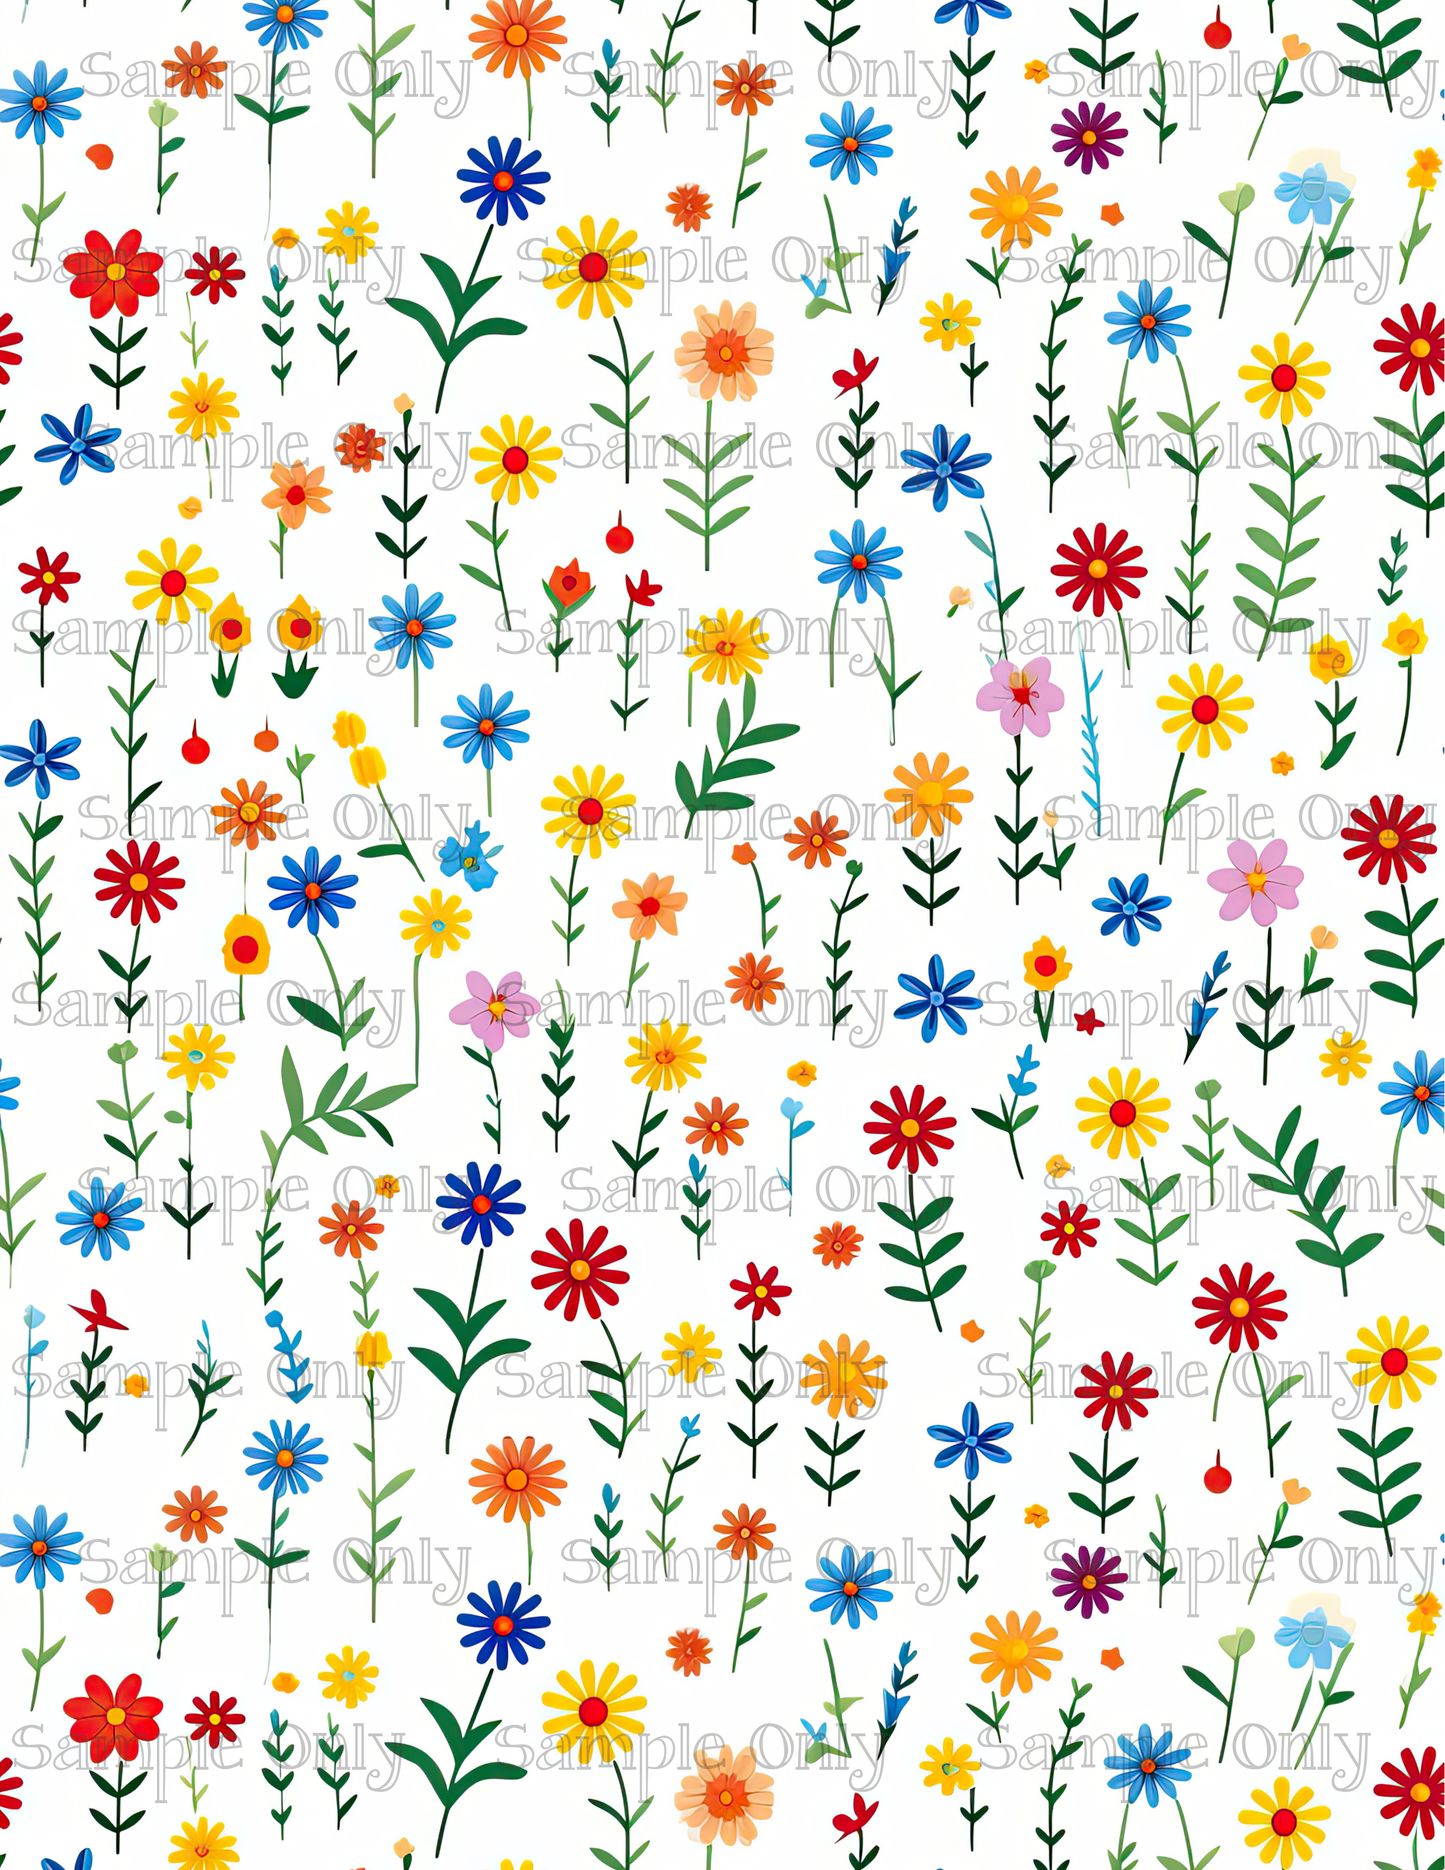 Quirky Blooms Floral Pattern Set 02 Image Sheet For Polymer Clay Transfer Decal DIGITAL FILE OR PRINTED